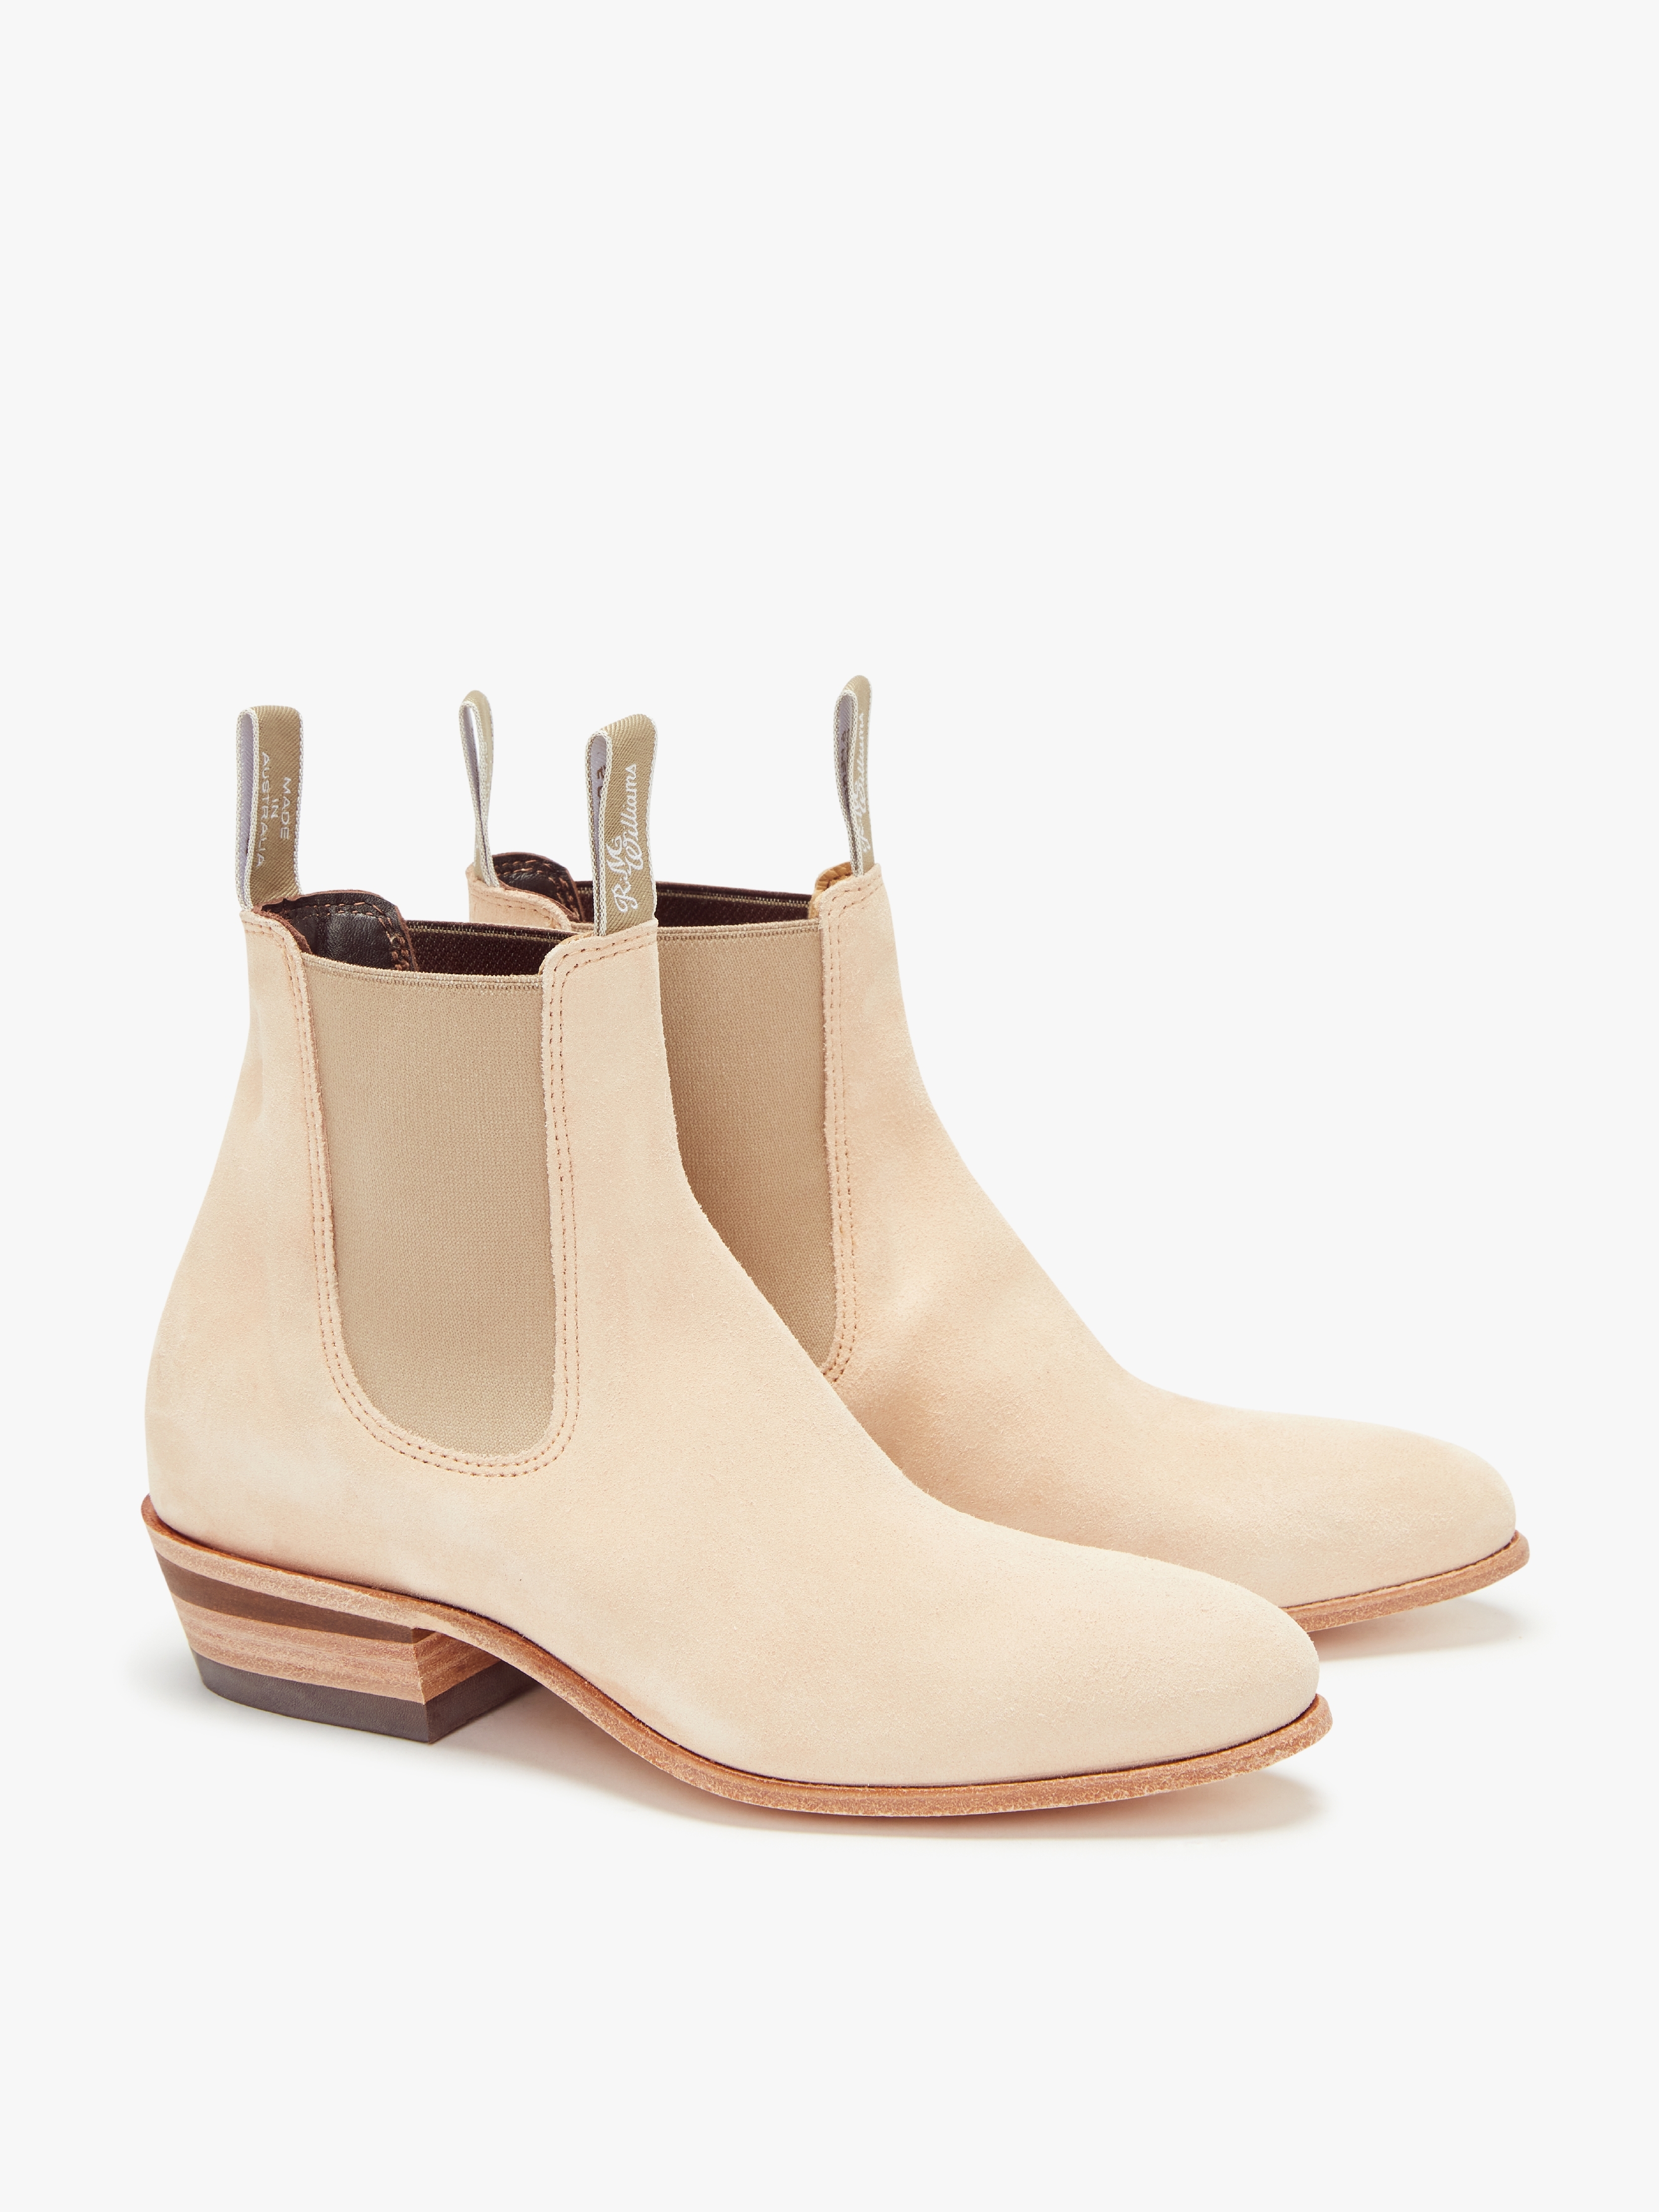 Corso Merivale - New Seasonal RM Williams Boot - The Lady Yearling in  'Slate' with Linen Elastics & Tugs - Gorgeous combination for Spring/Summer  X Handcrafted in Australia, the Lady Yearling Boot